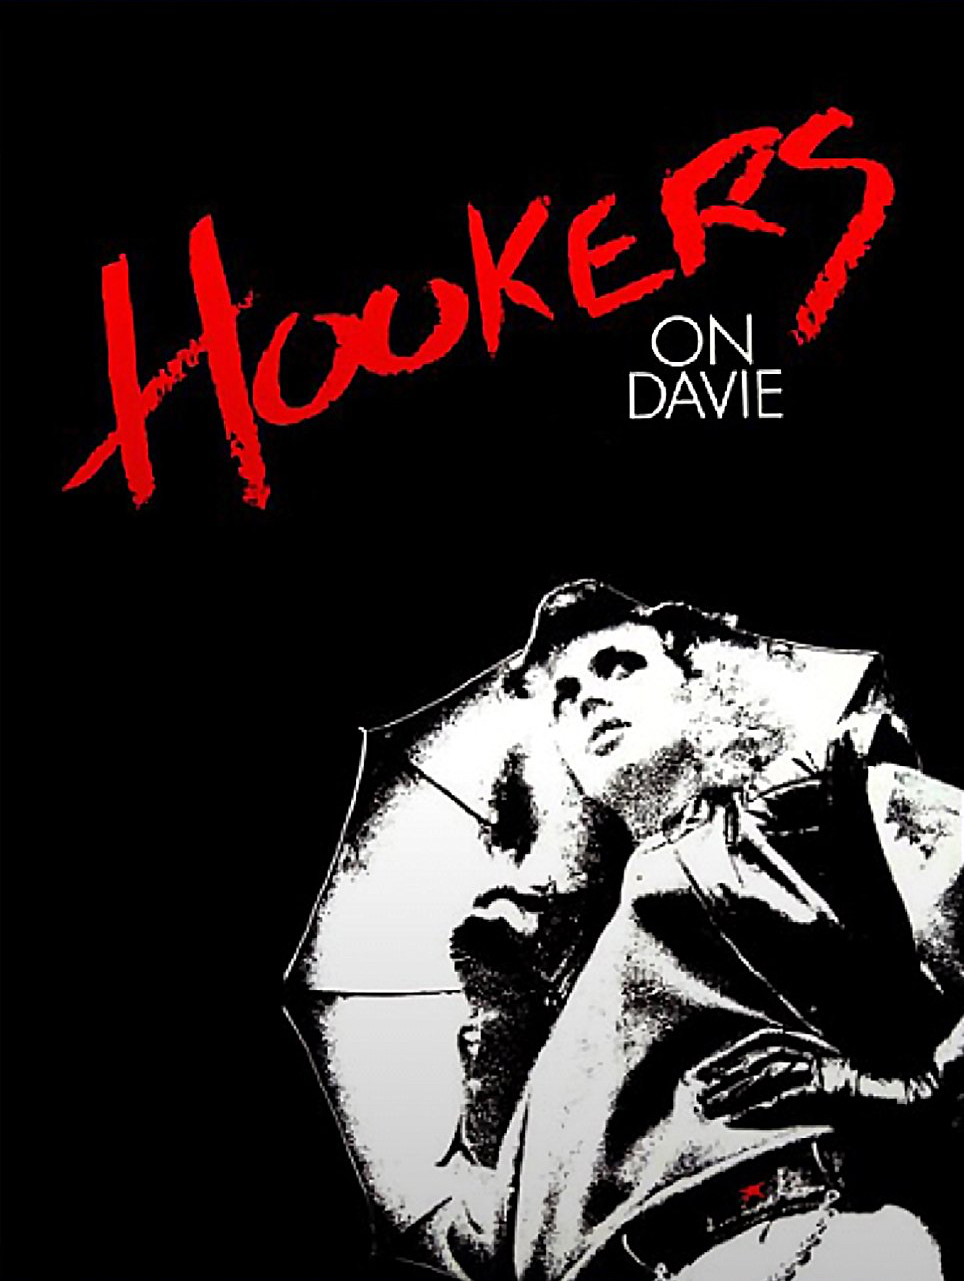 Hookers on Davie by Janice Cole and Holly Dale, movie poster 1984